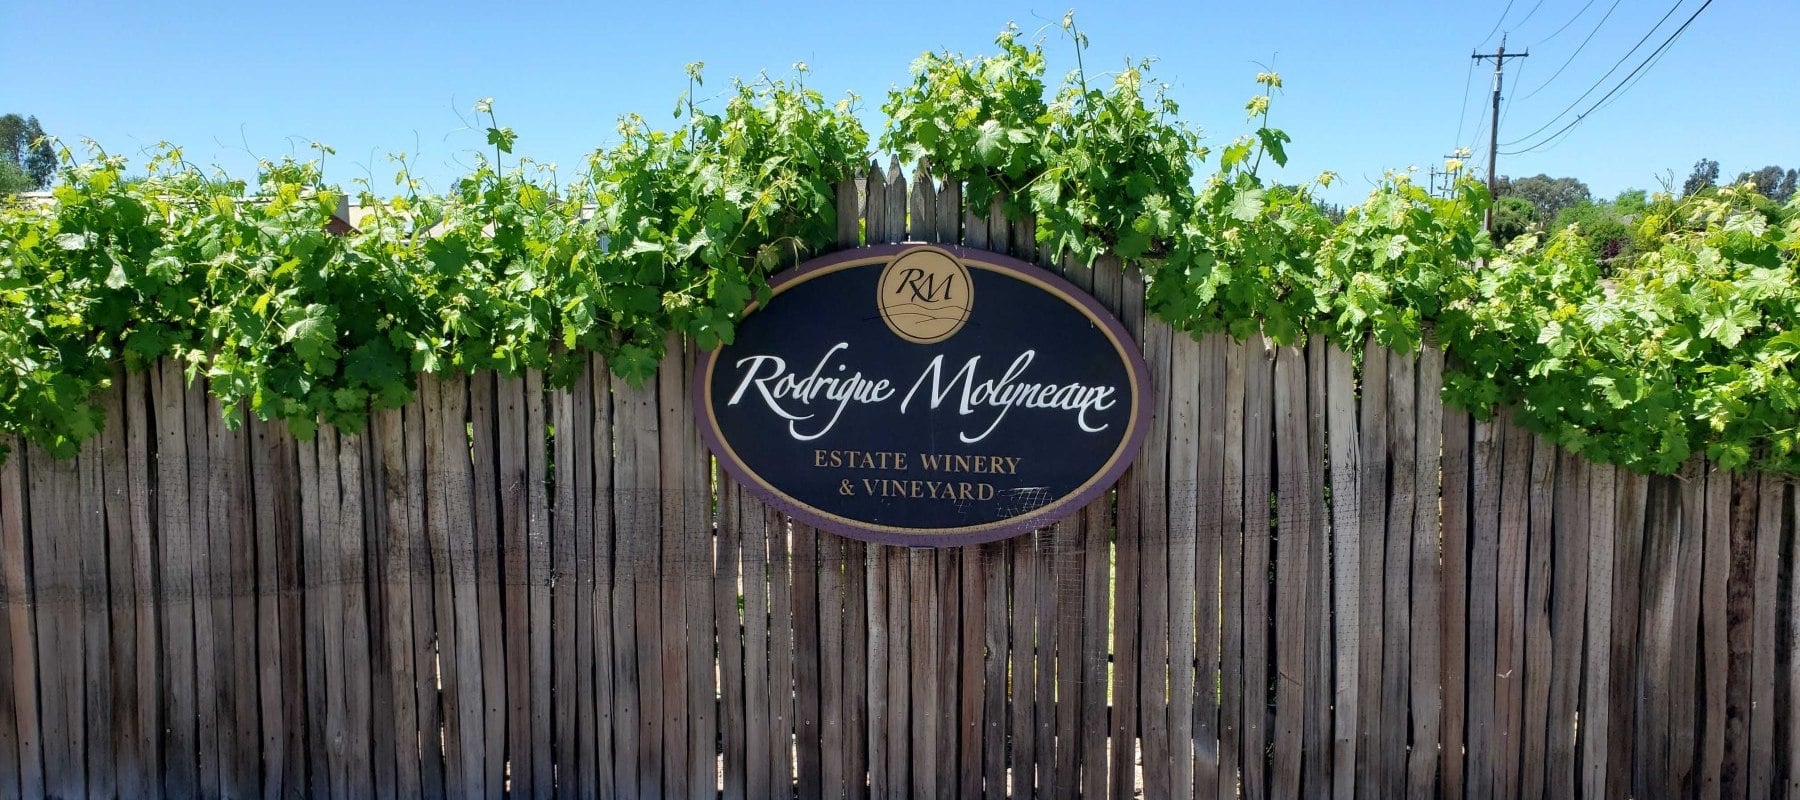 Wooden fence at the entrance to the property with an oval “Rodrigue Molyneux” sign with Barbera grape vines growing along the top and a blue sky.